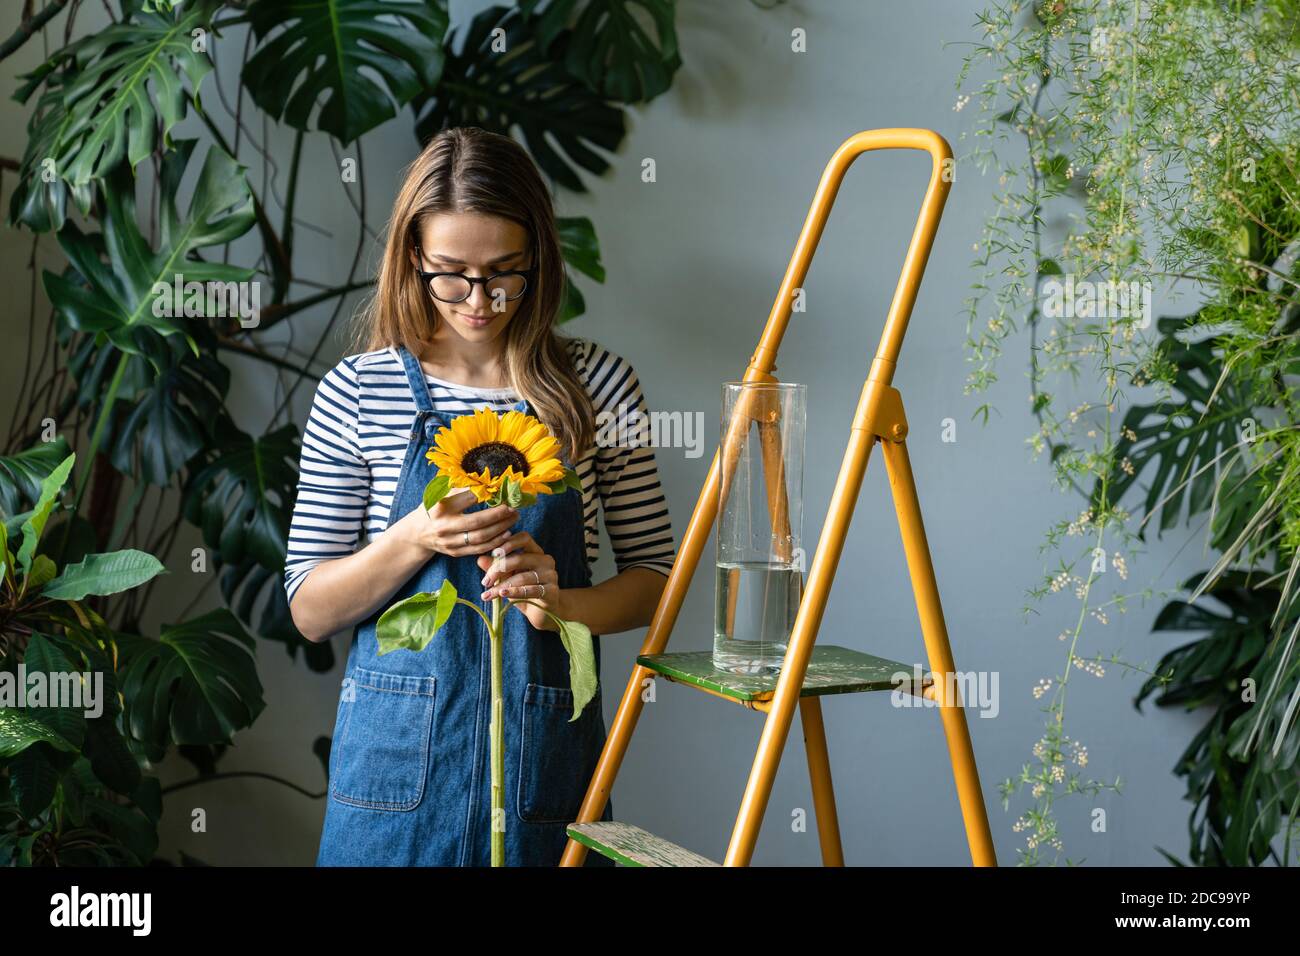 Florist woman surrounded by tropical plants holding sunflower, standing near the orange stepladder in her flower store. Stock Photo